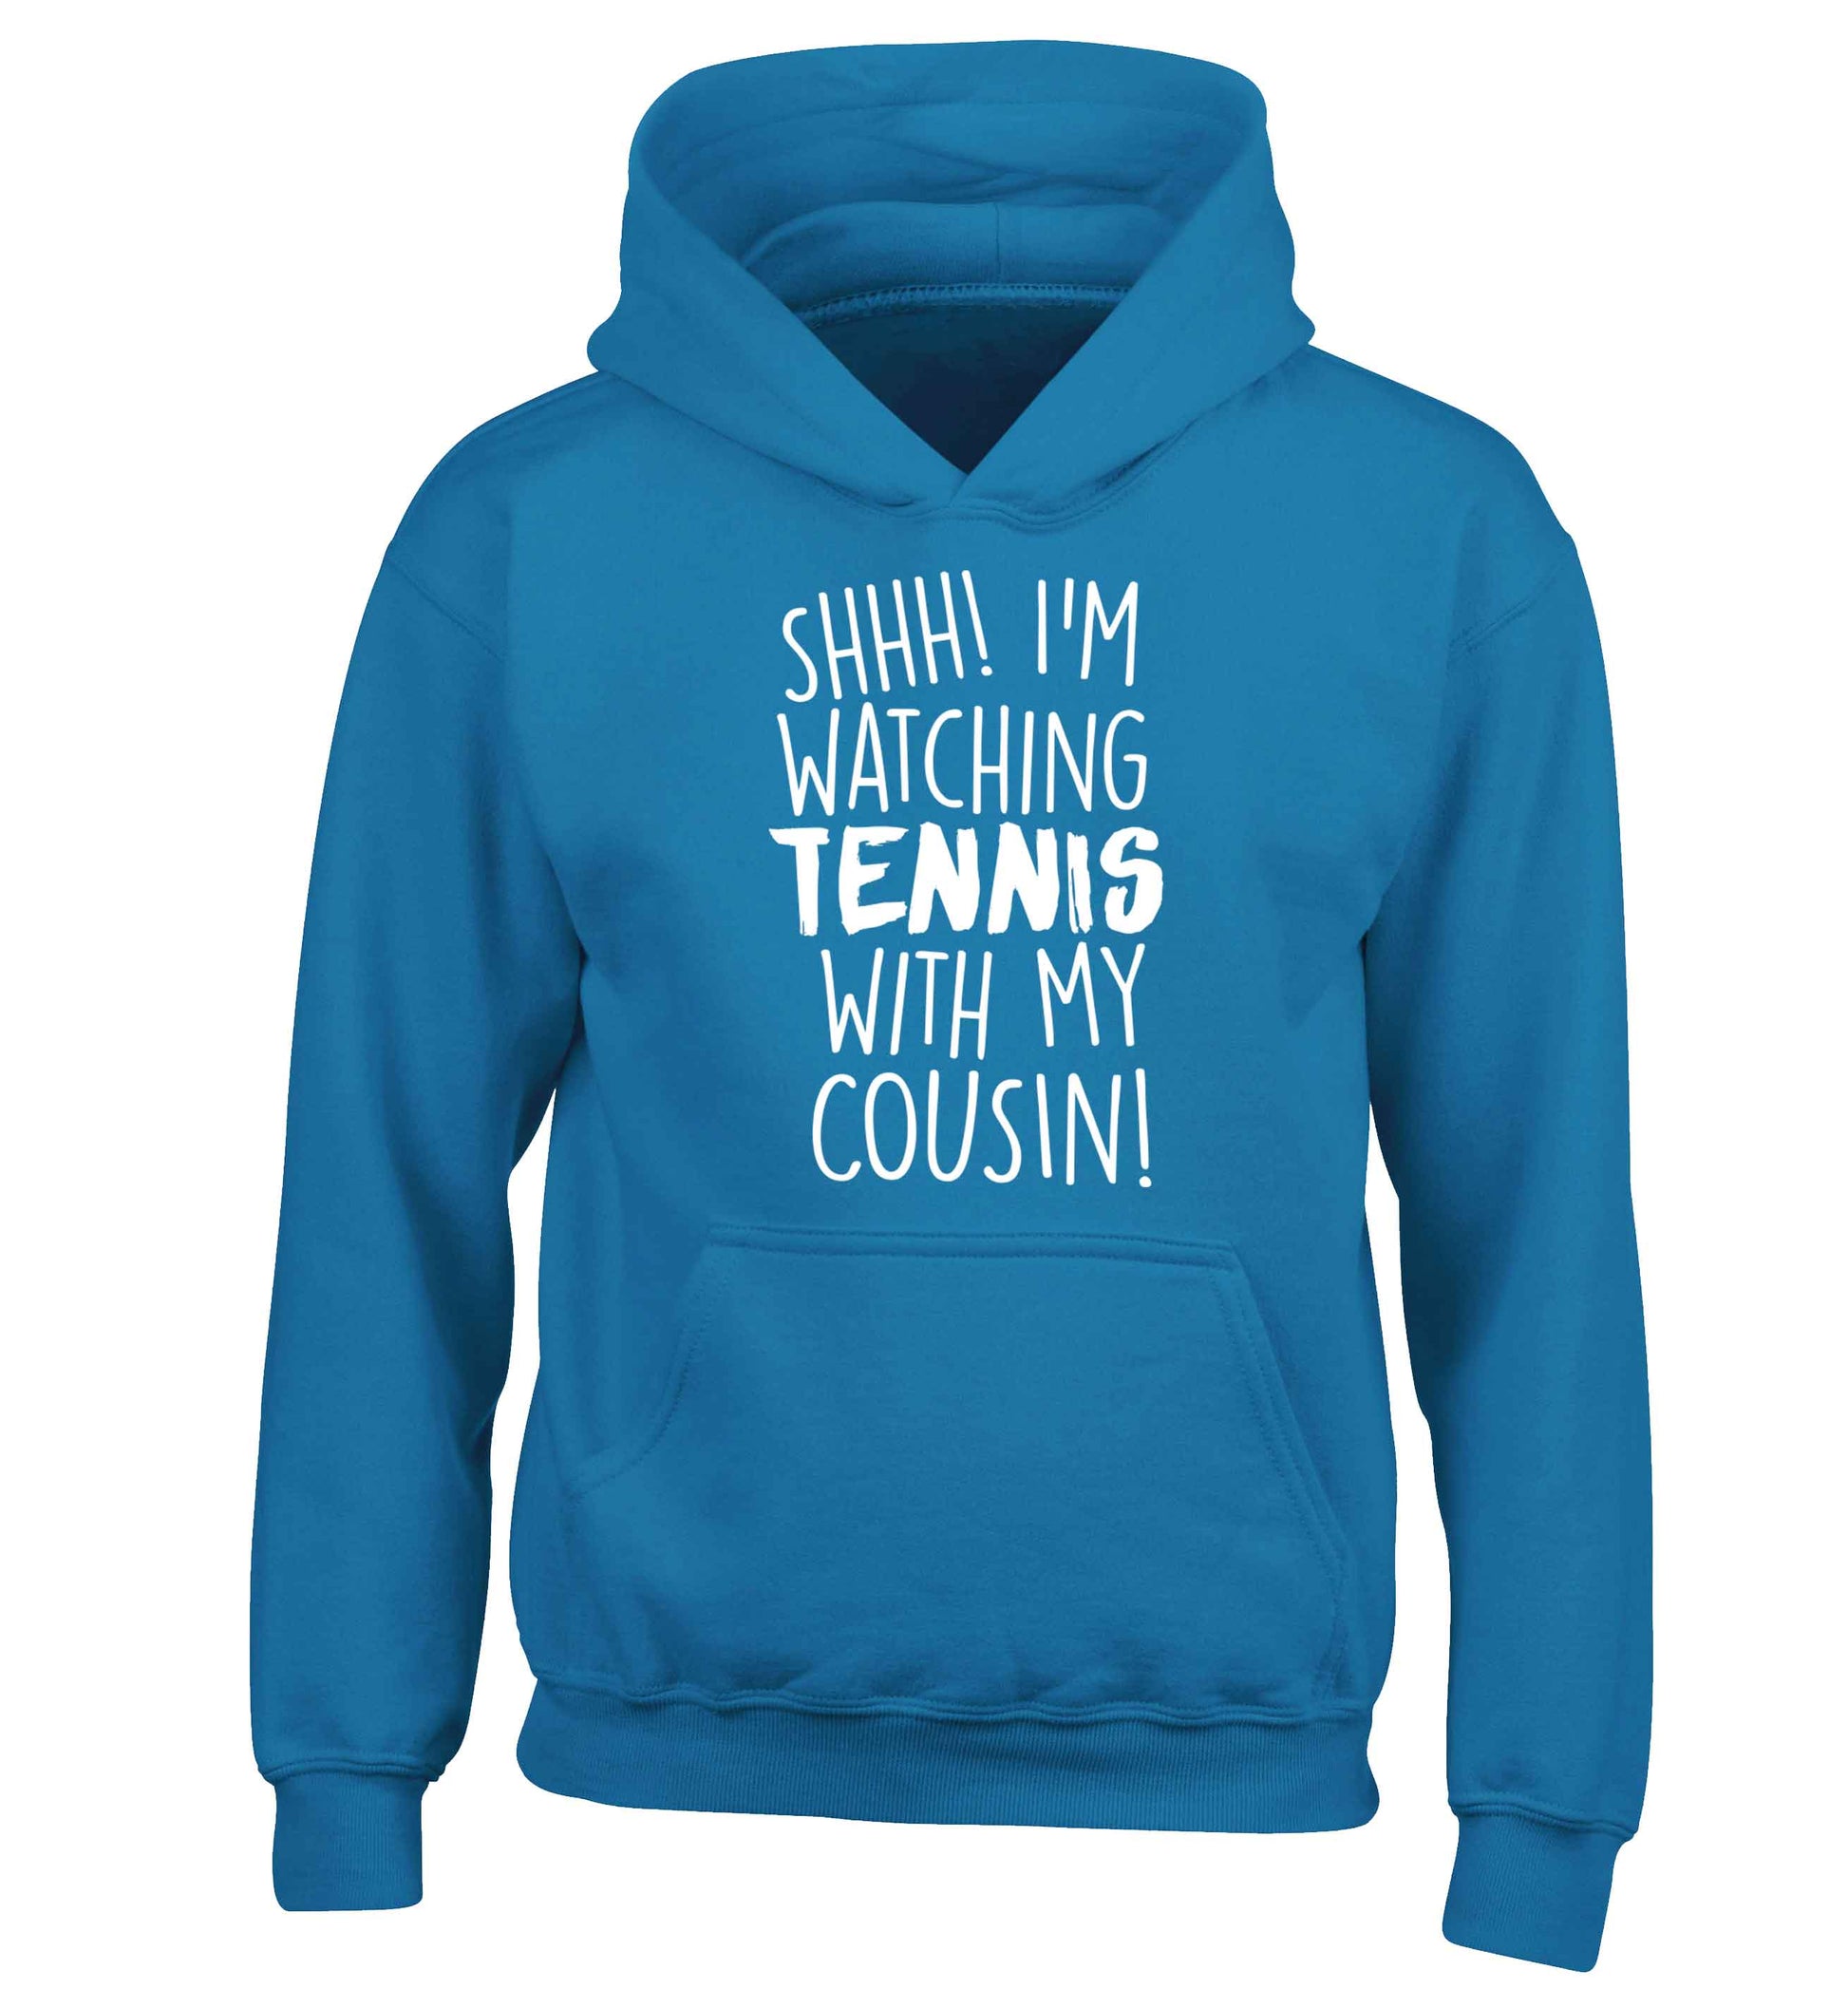 Shh! I'm watching tennis with my cousin! children's blue hoodie 12-13 Years